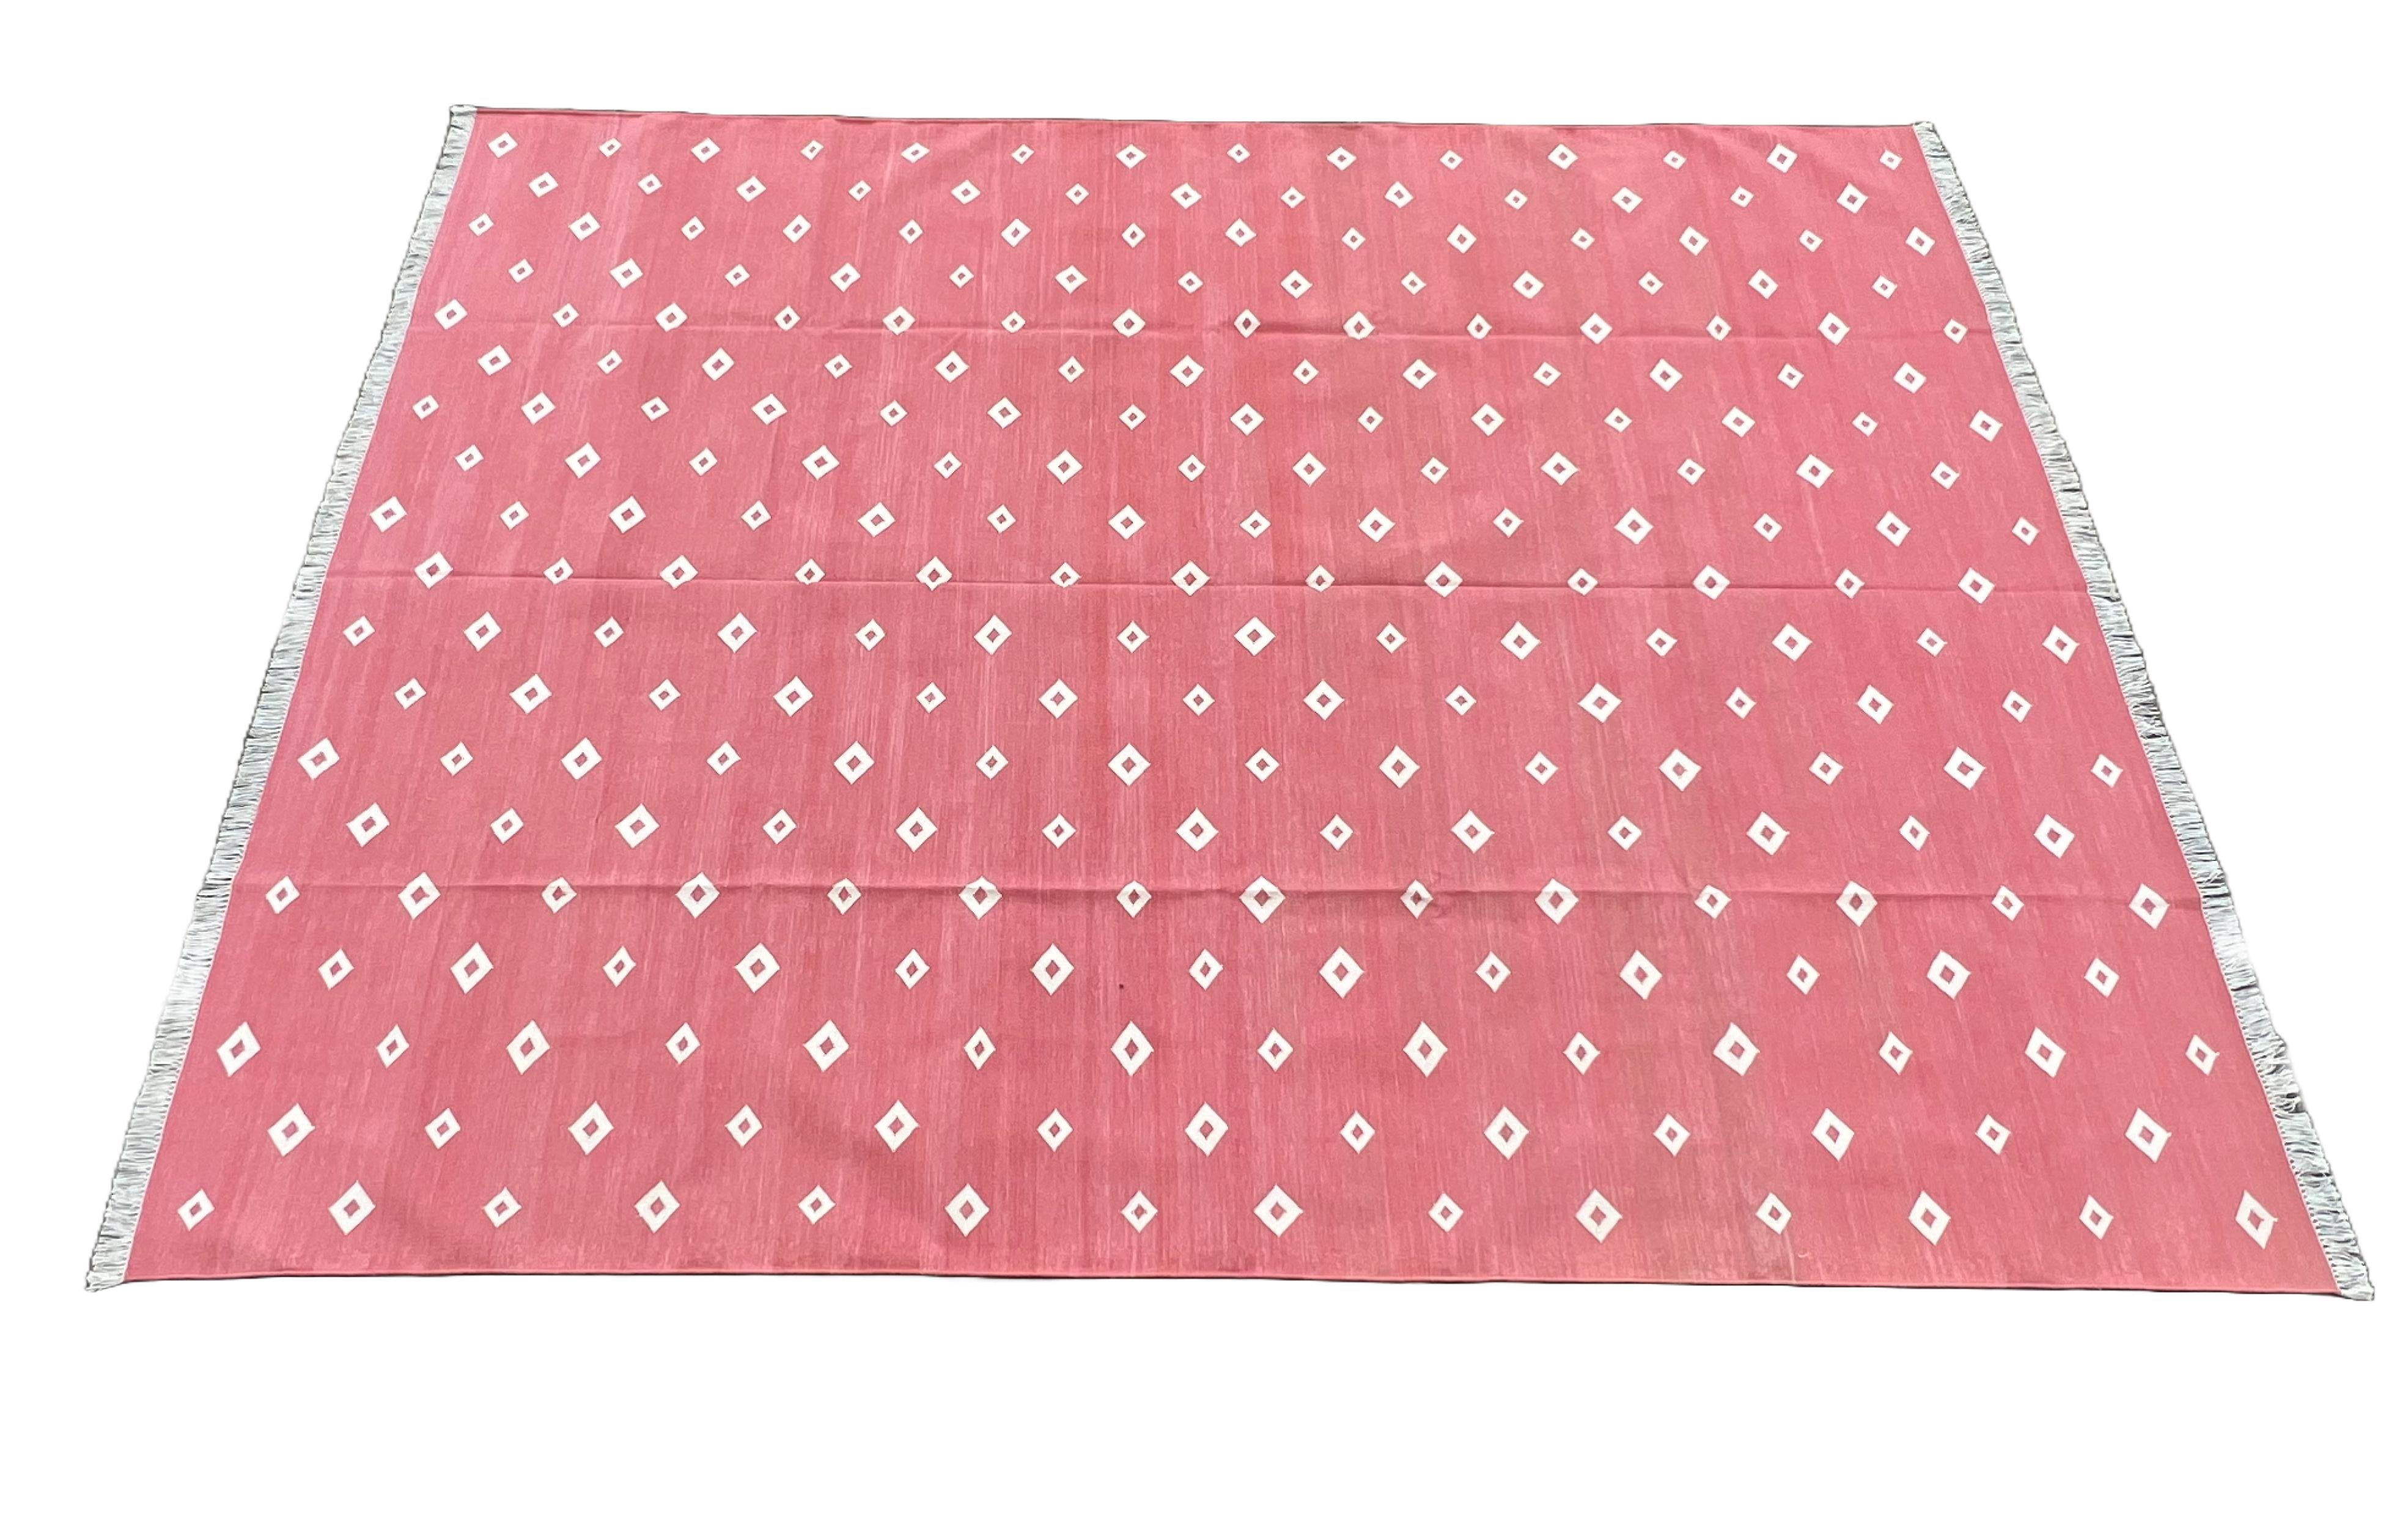 Mid-Century Modern Handmade Cotton Area Flat Weave Rug, 8x10 Pink And White Diamond Indian Dhurrie For Sale